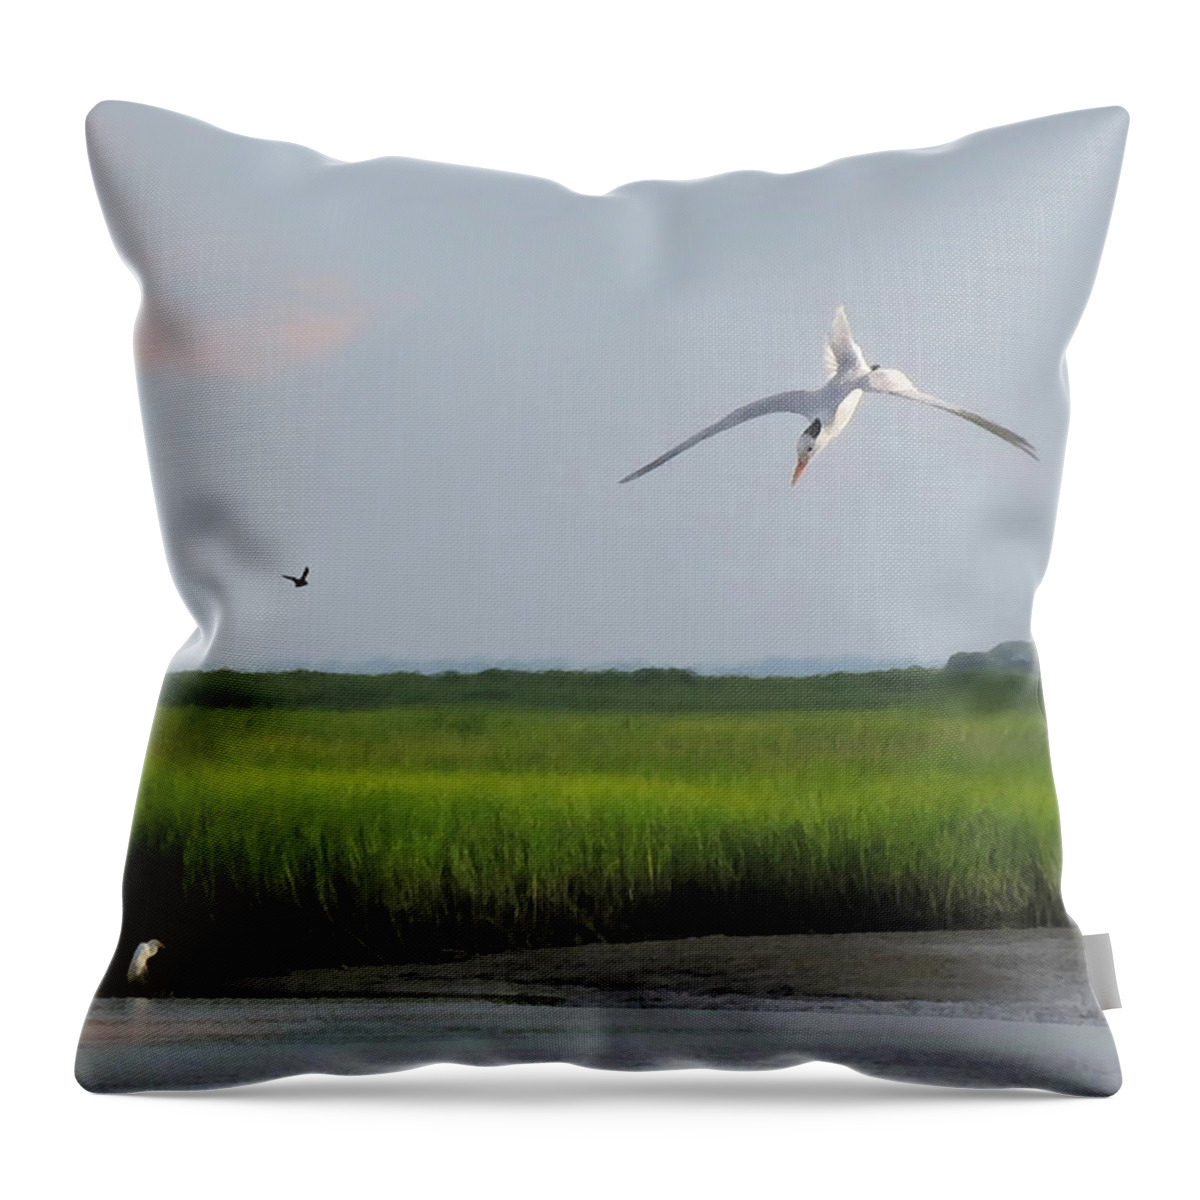 Wildlife Throw Pillow featuring the photograph Diving Tern by Deborah Smith